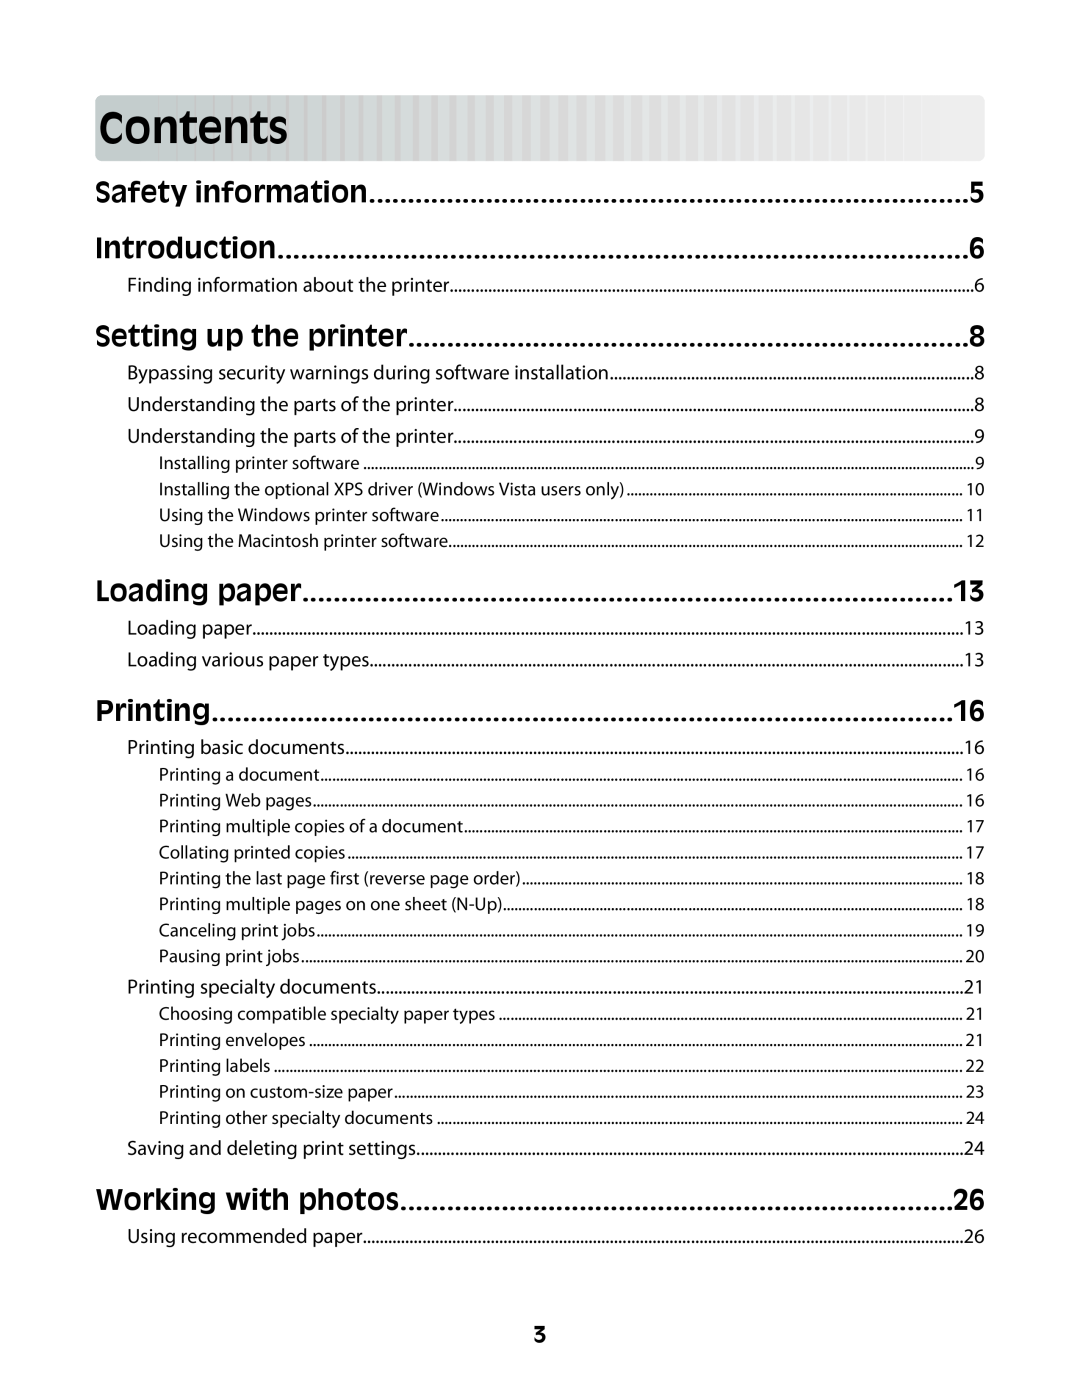 Lexmark Z2300 manual Contents, Safety information, Setting up the printer, Loading paper, Printing, Working with photos 